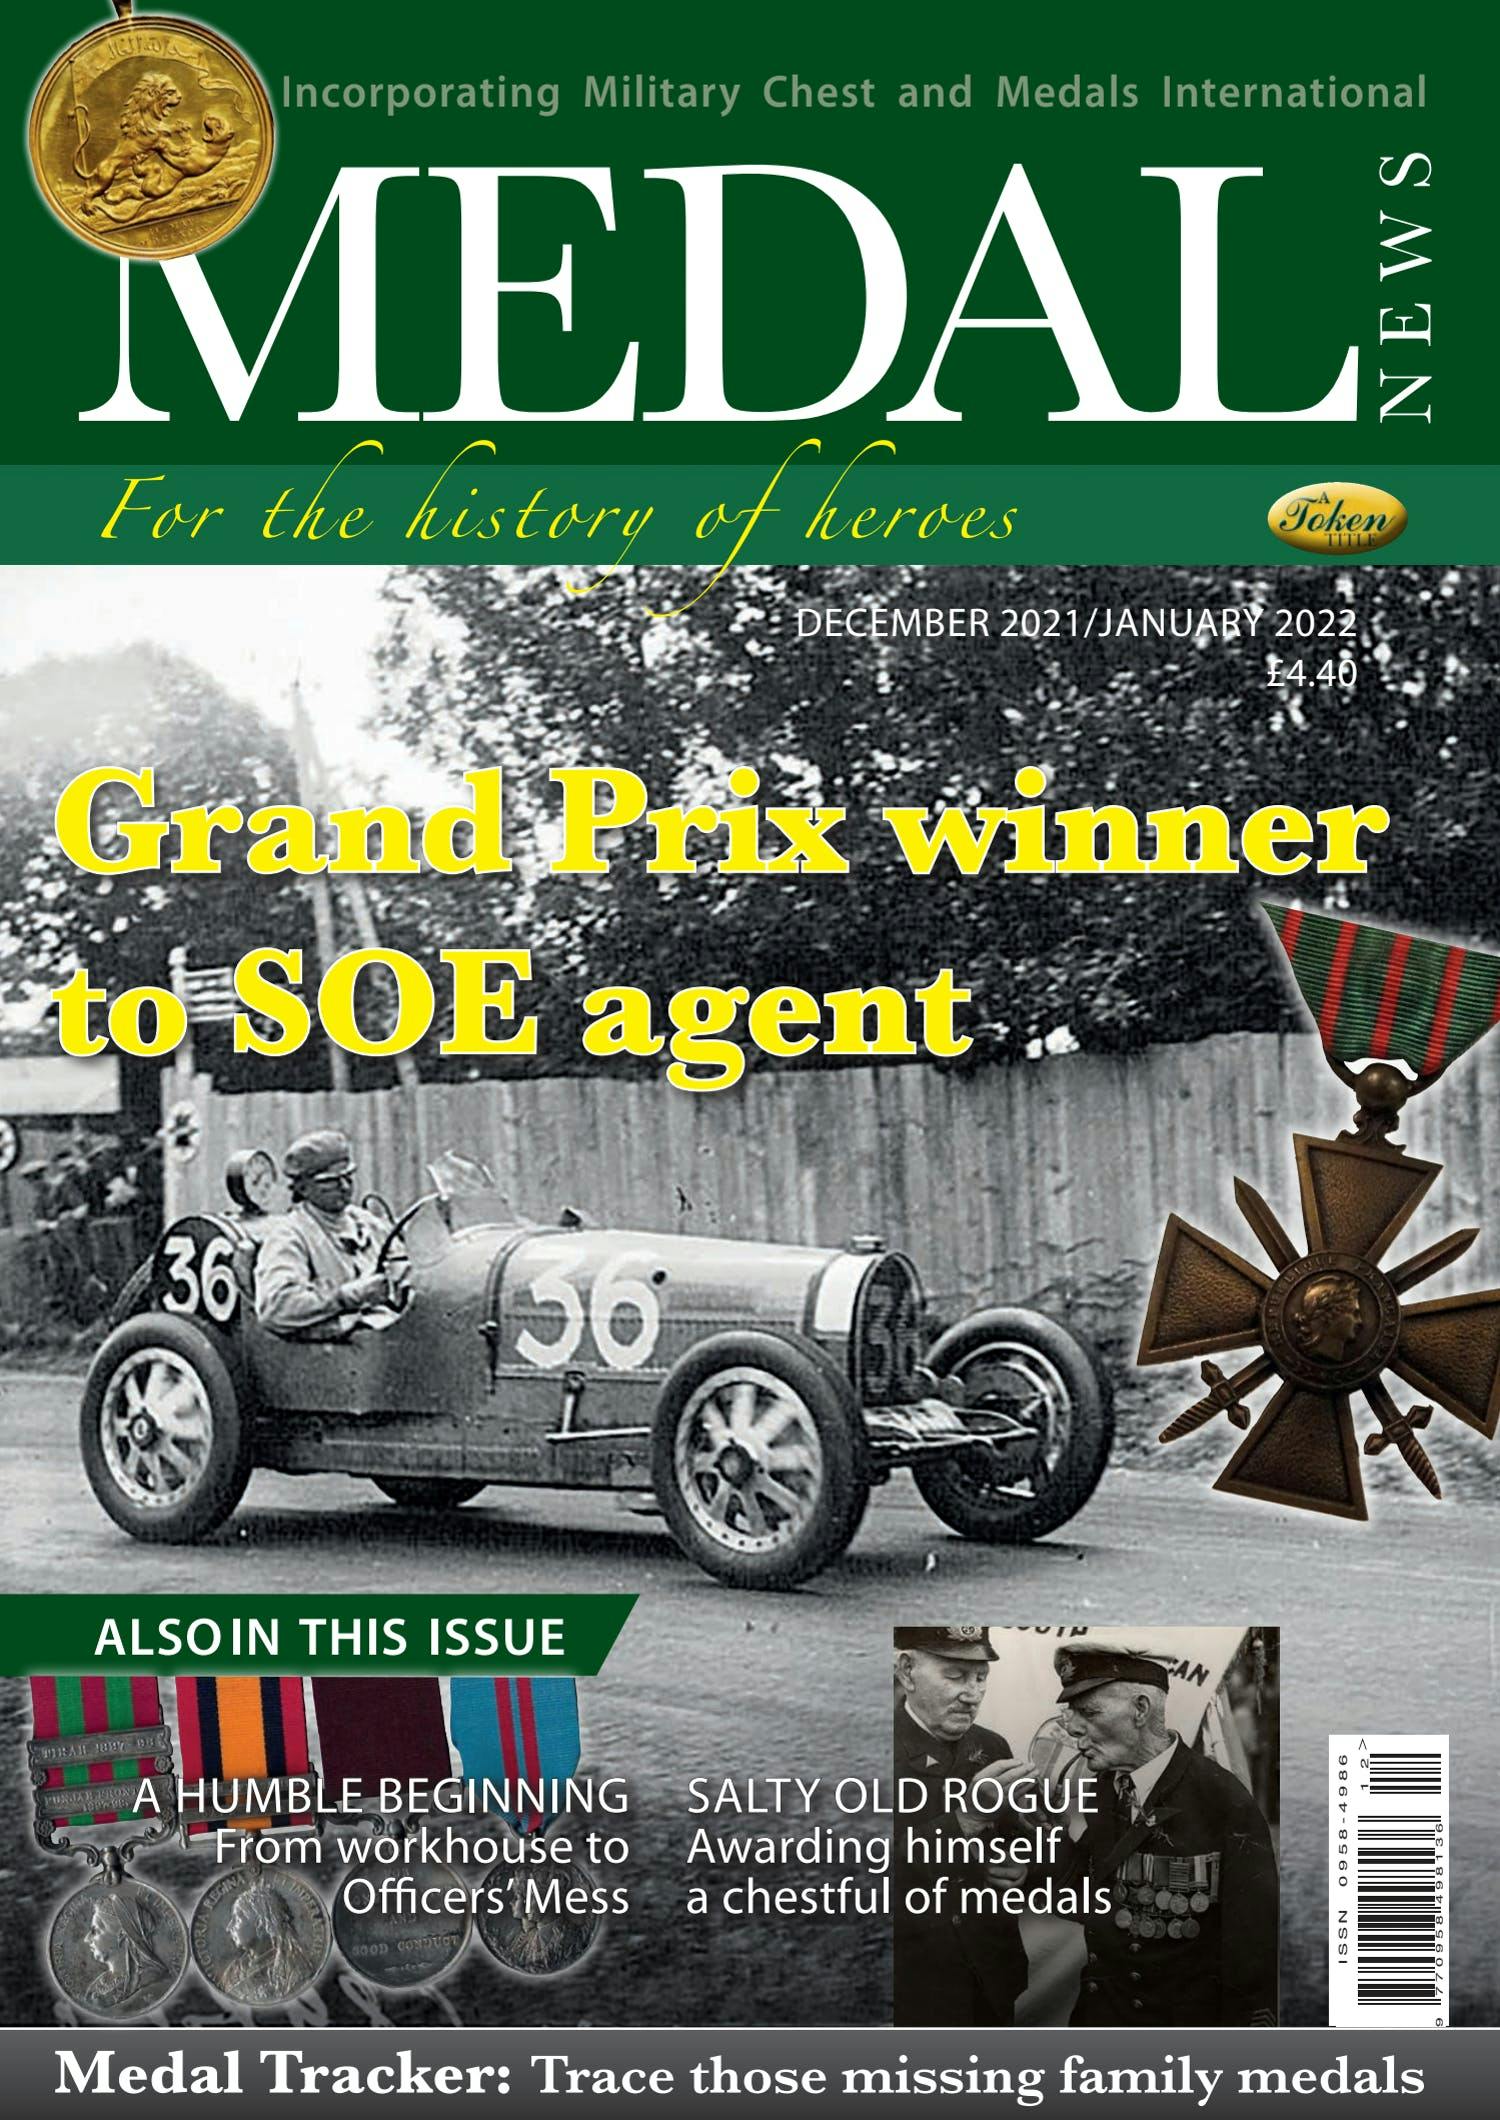 The front cover of Medal News, January 2022 - Volume 60, Number 1